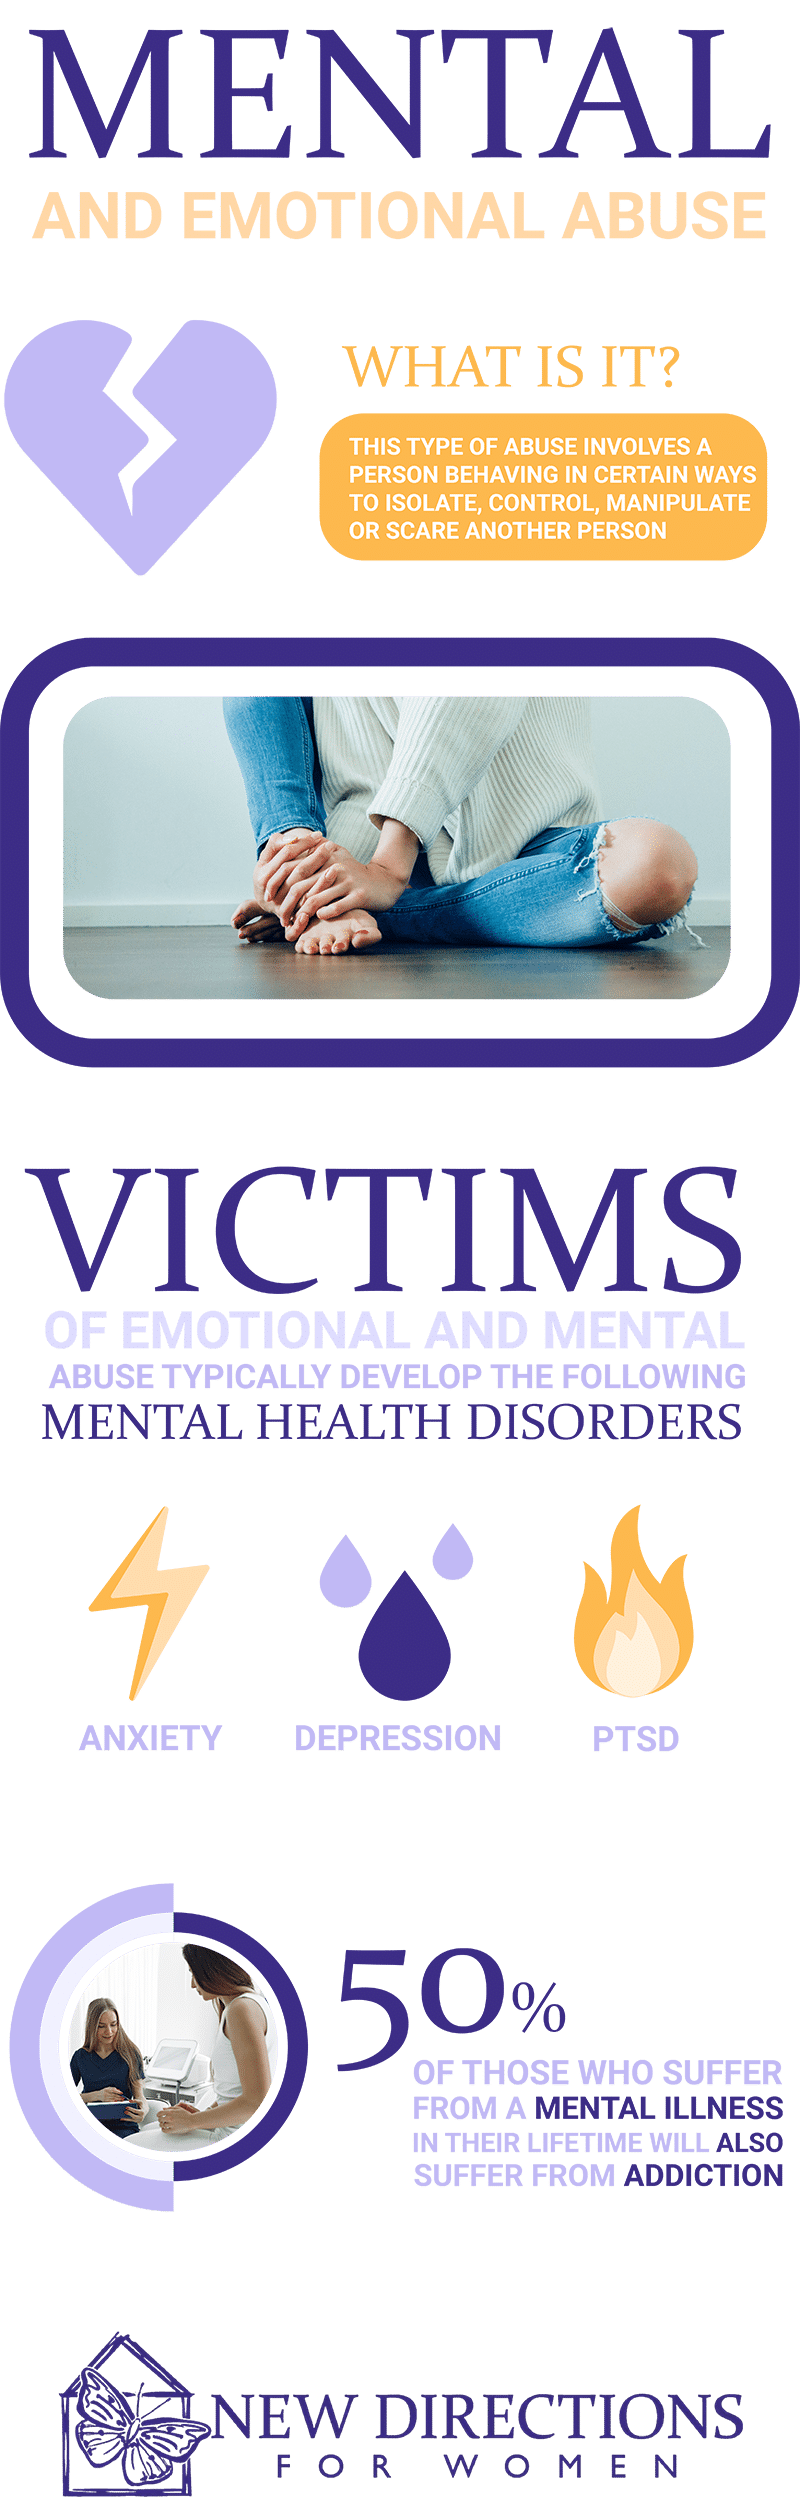 Addiction and Mental Abuse: The Effects of Mental, Emotional, and Psychological Abuse